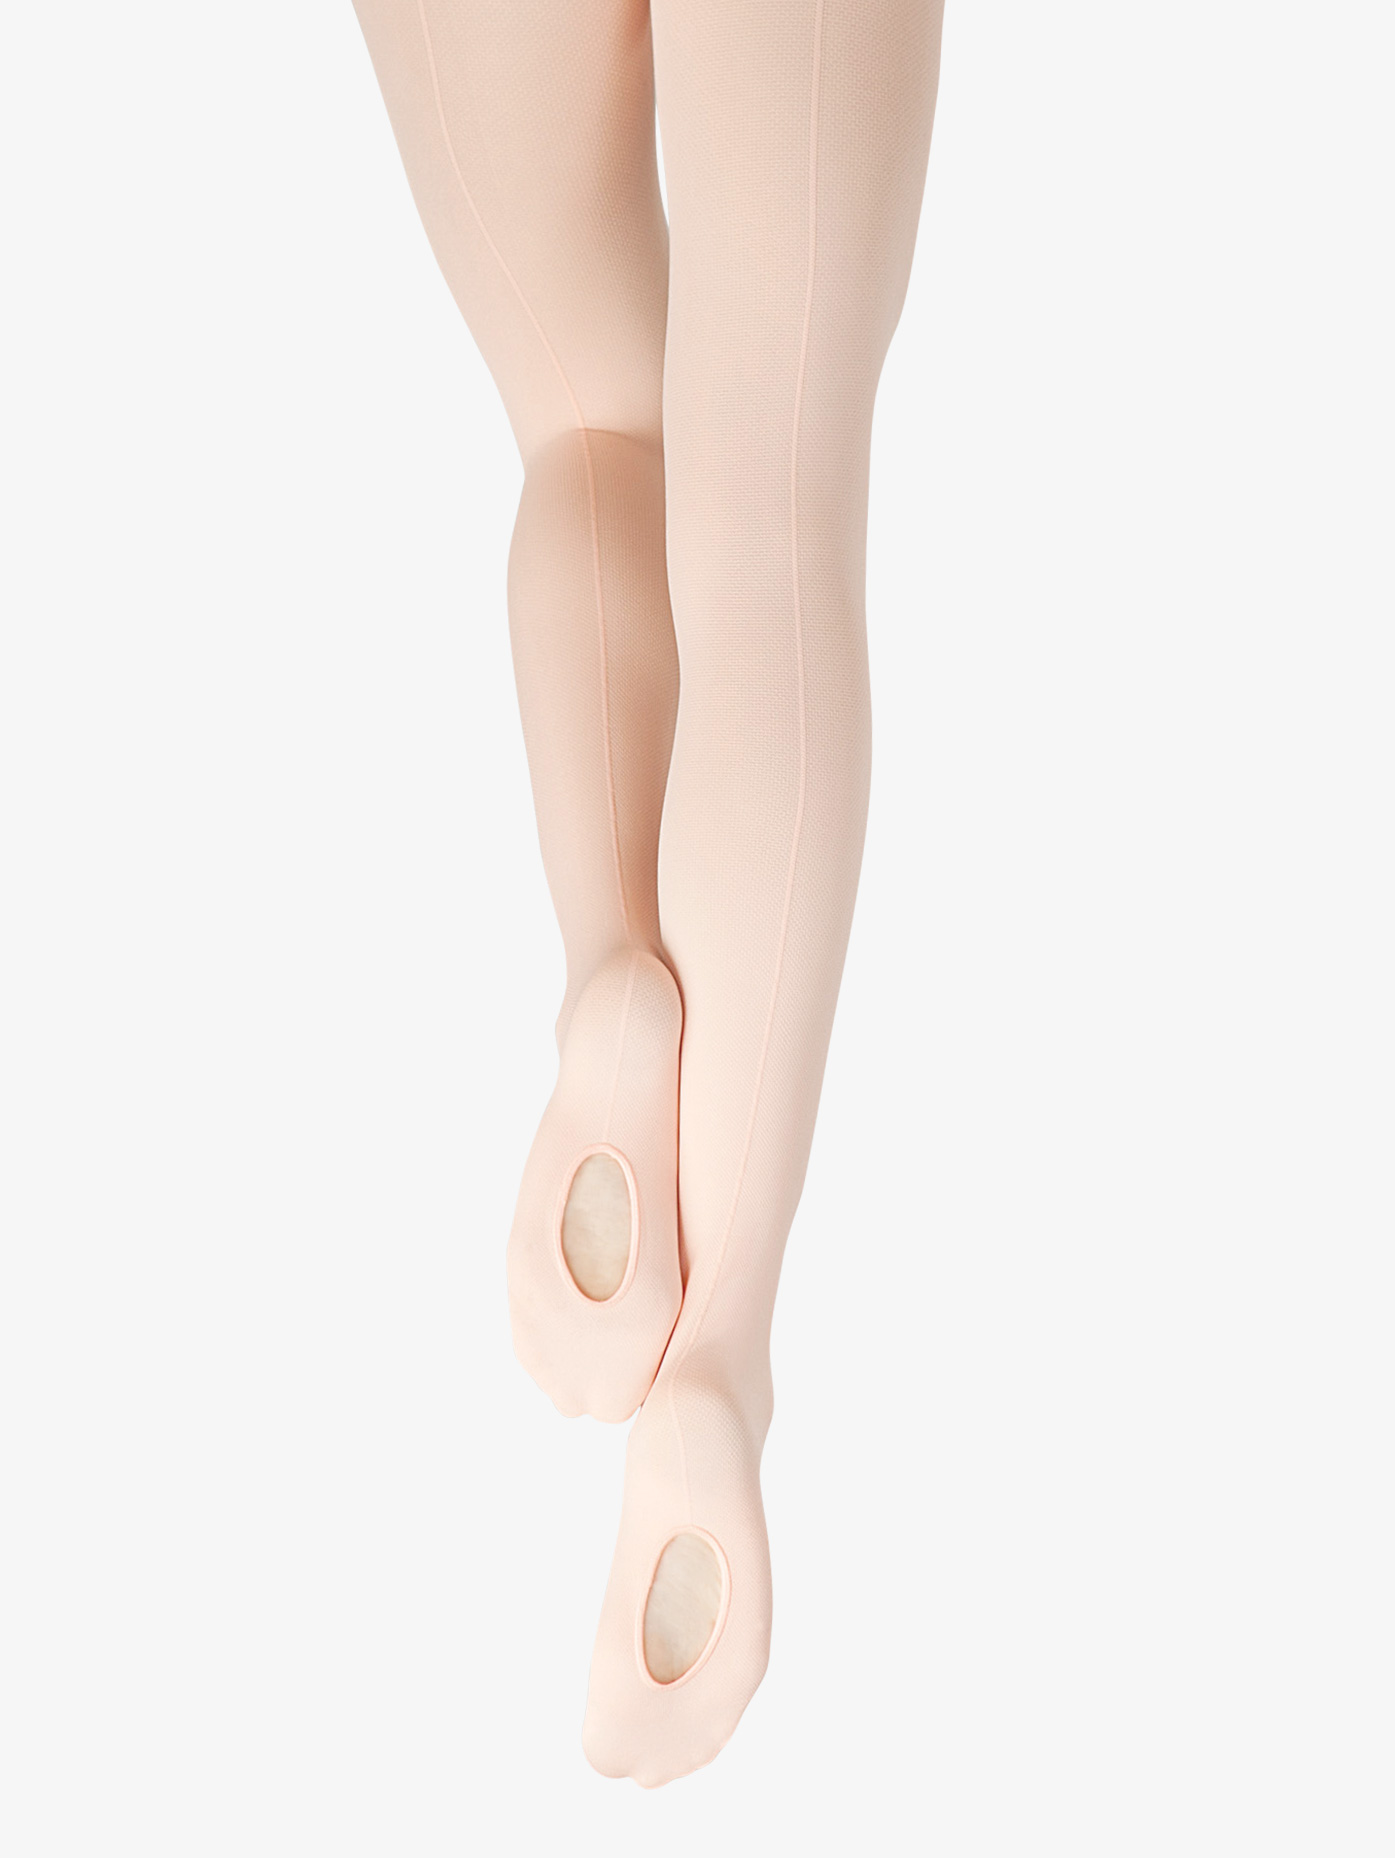 1 Pair Ballet Tights Full Footed//Convertible Soft Thick for Girls Women